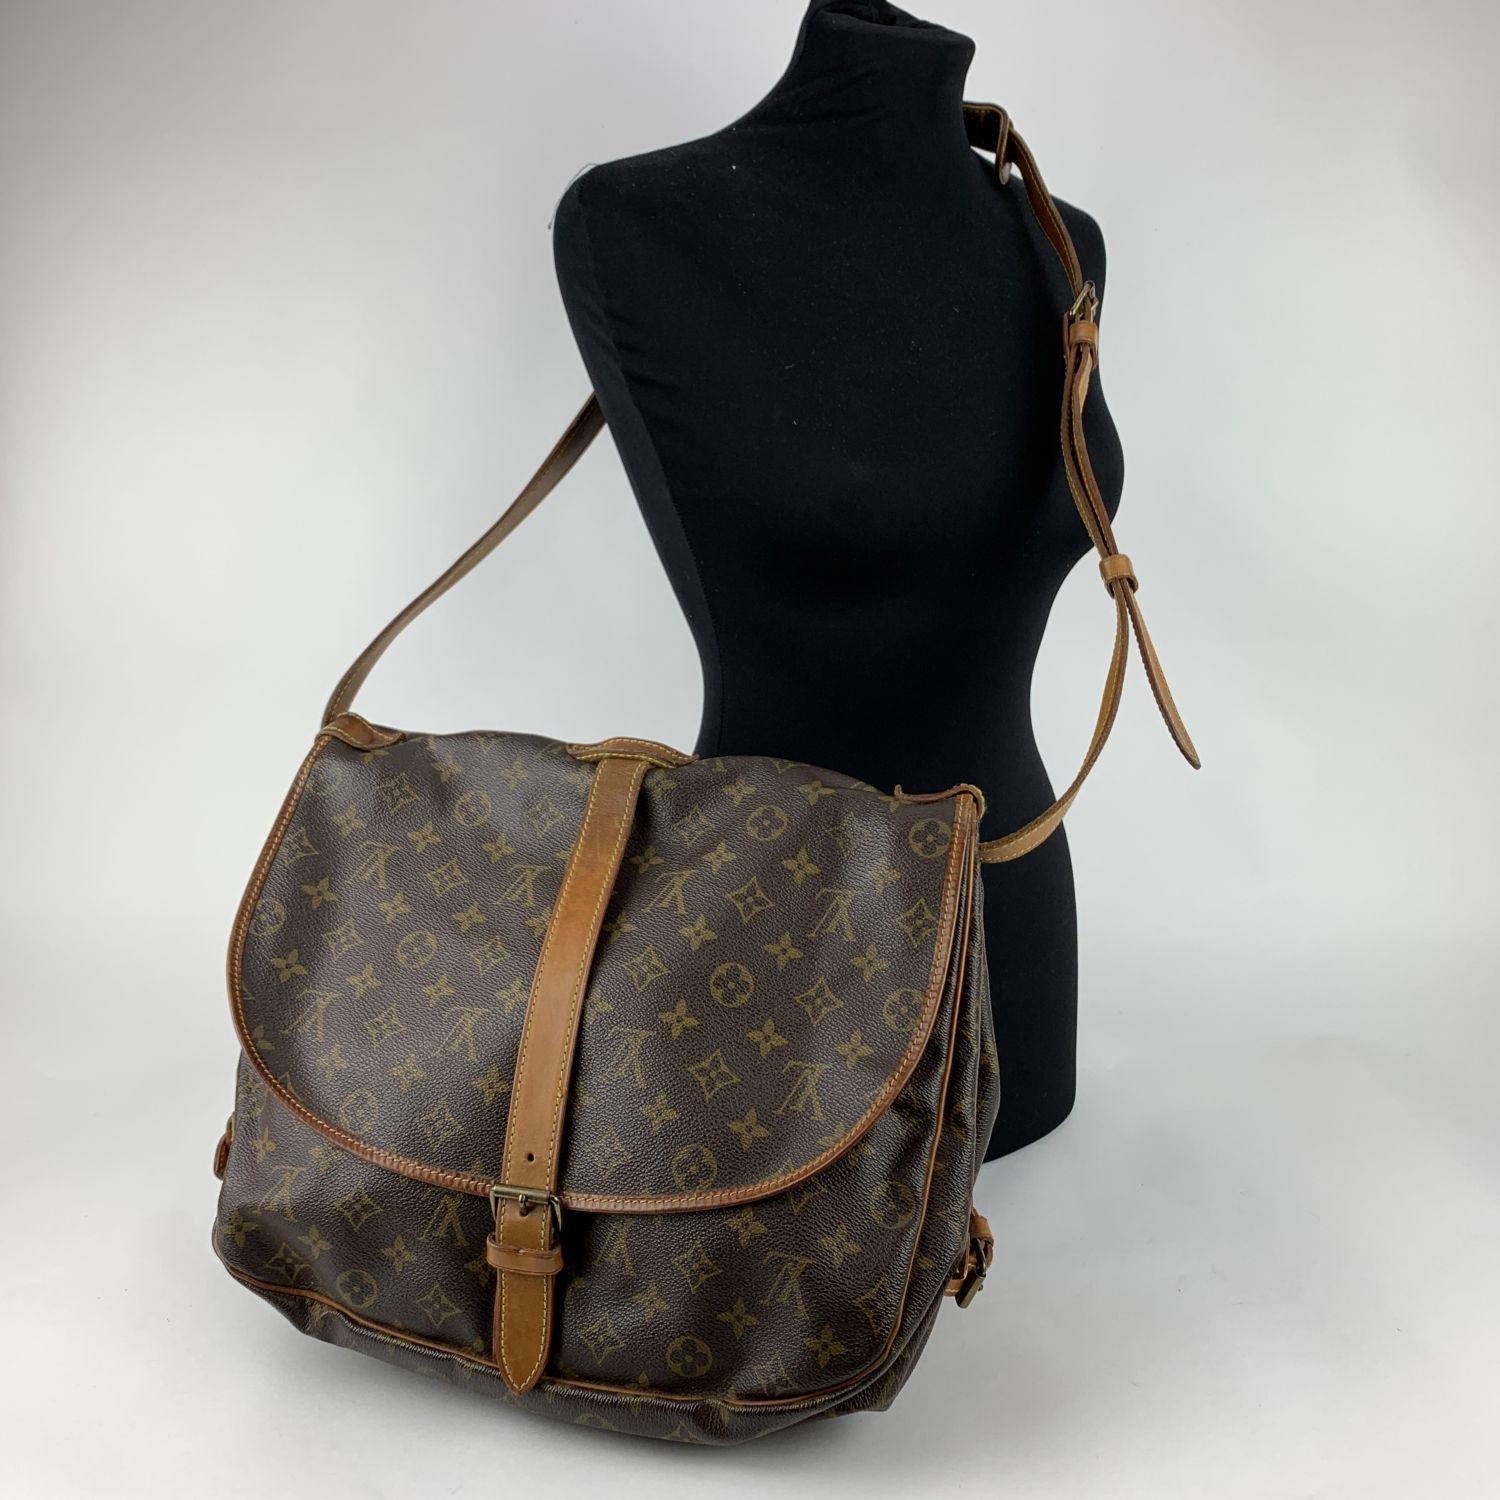 LOUIS VUITTON 'Saumur 35' inspired by equestrian 'SADDLE' bag. The legendary SAUMUR features dual front compartments, held tightly together at the sides with belt-like tabs. Adjustable long shoulder strap with pad for added comfort.

- Monogram